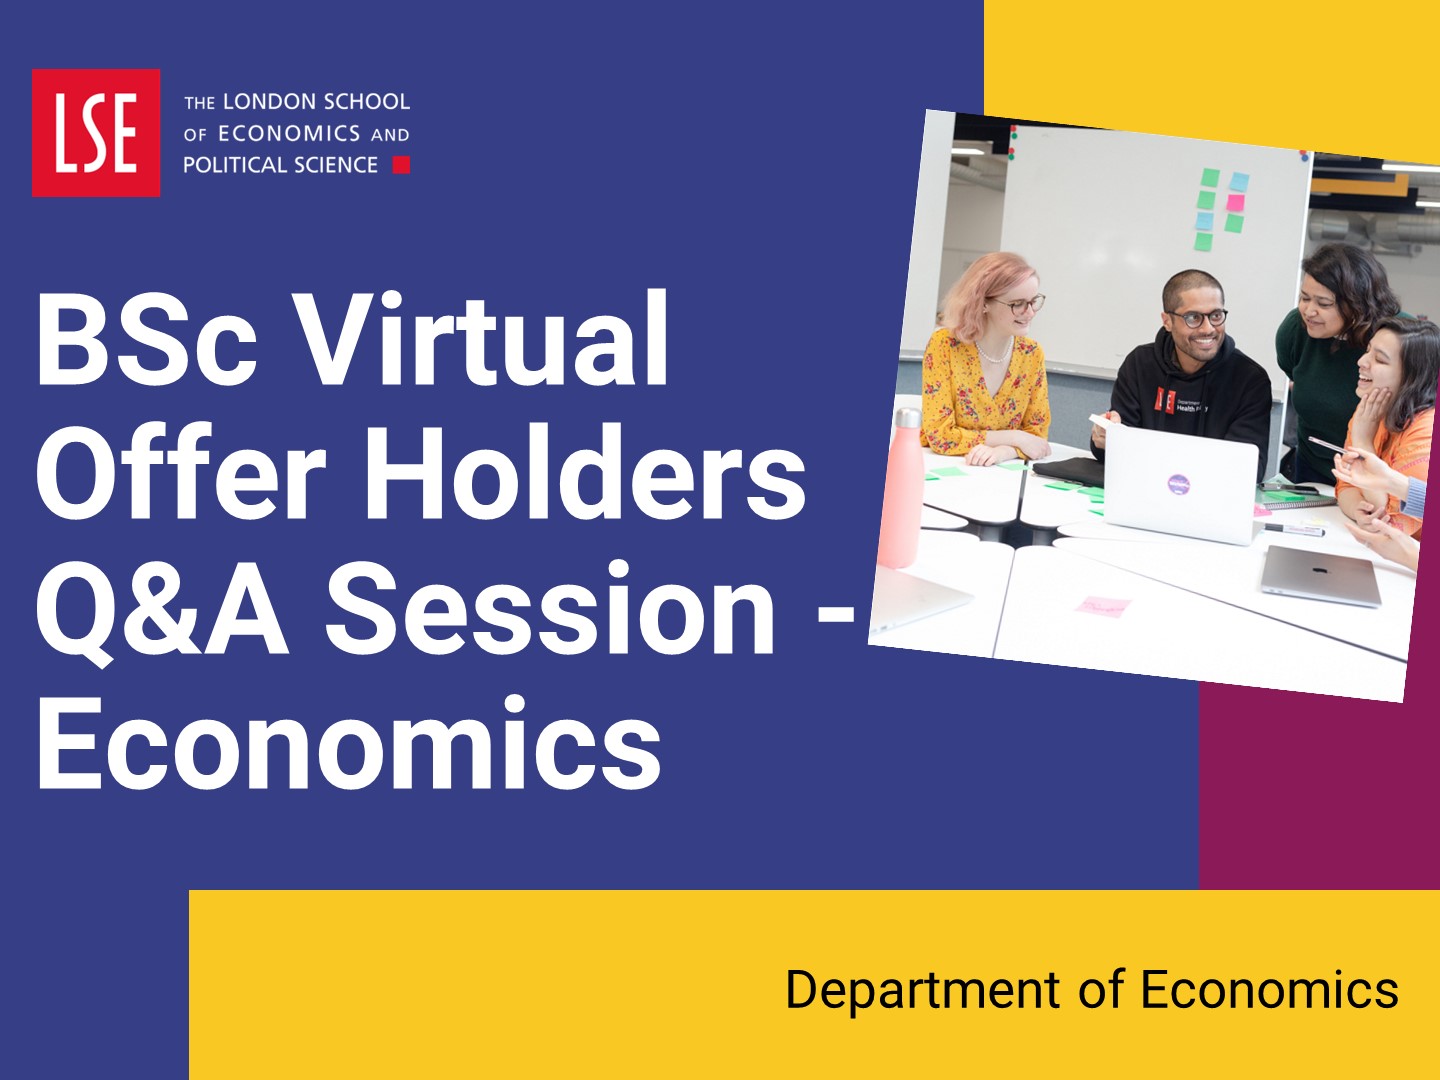 Watch the economics offer holders' Q&A session